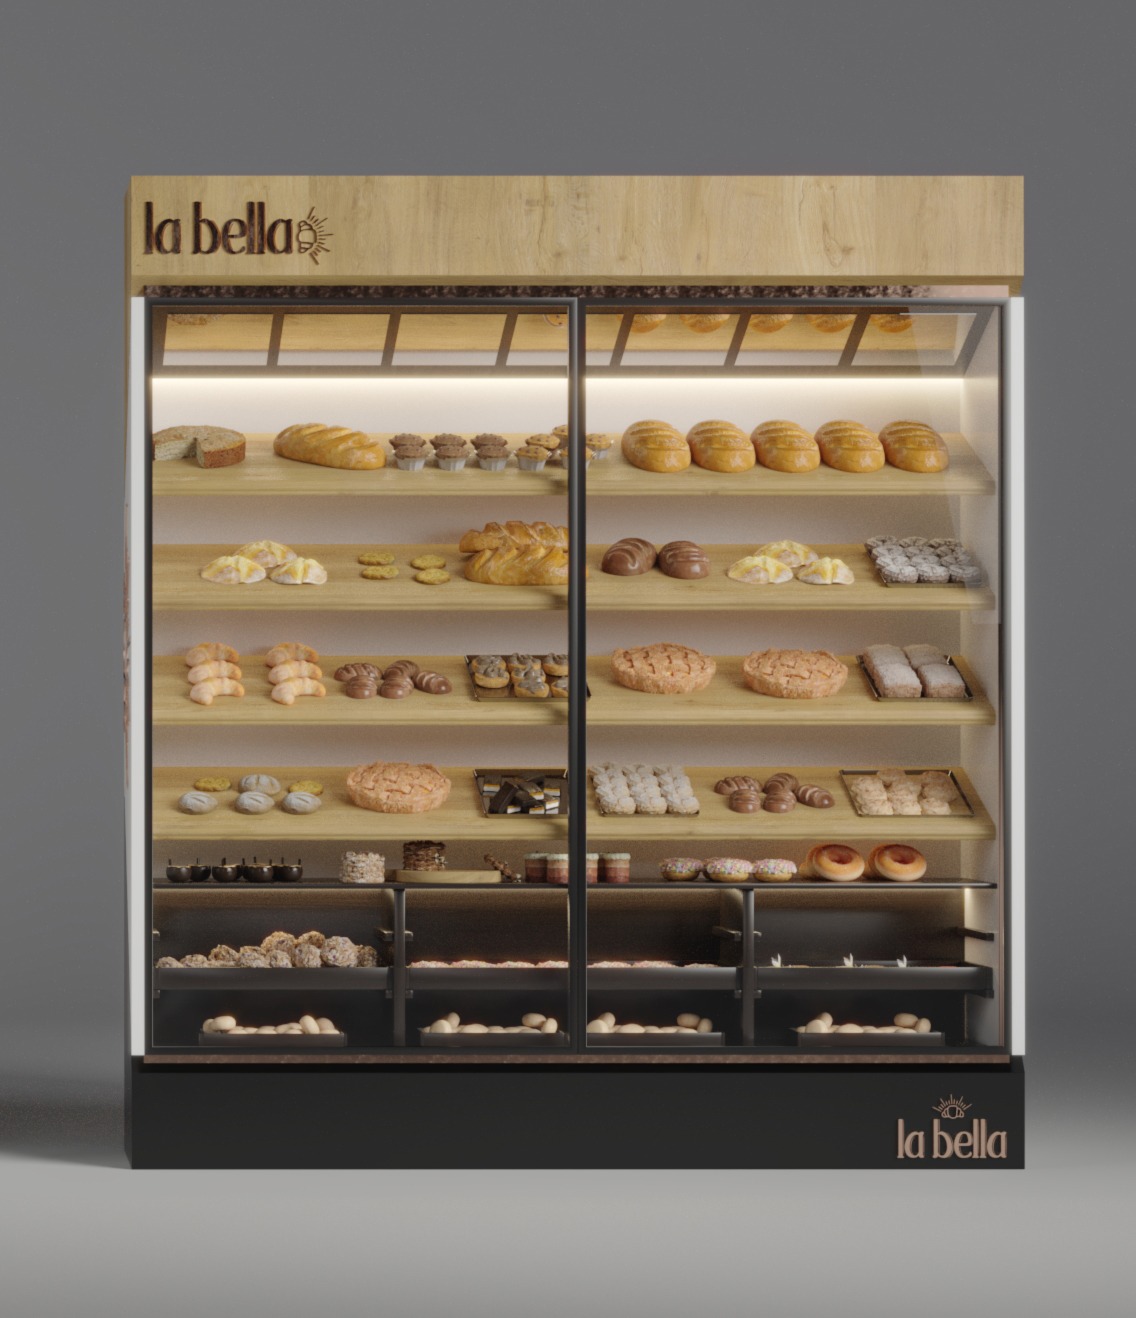 stand - big stand - stand design - hrarchz - bread - food container 